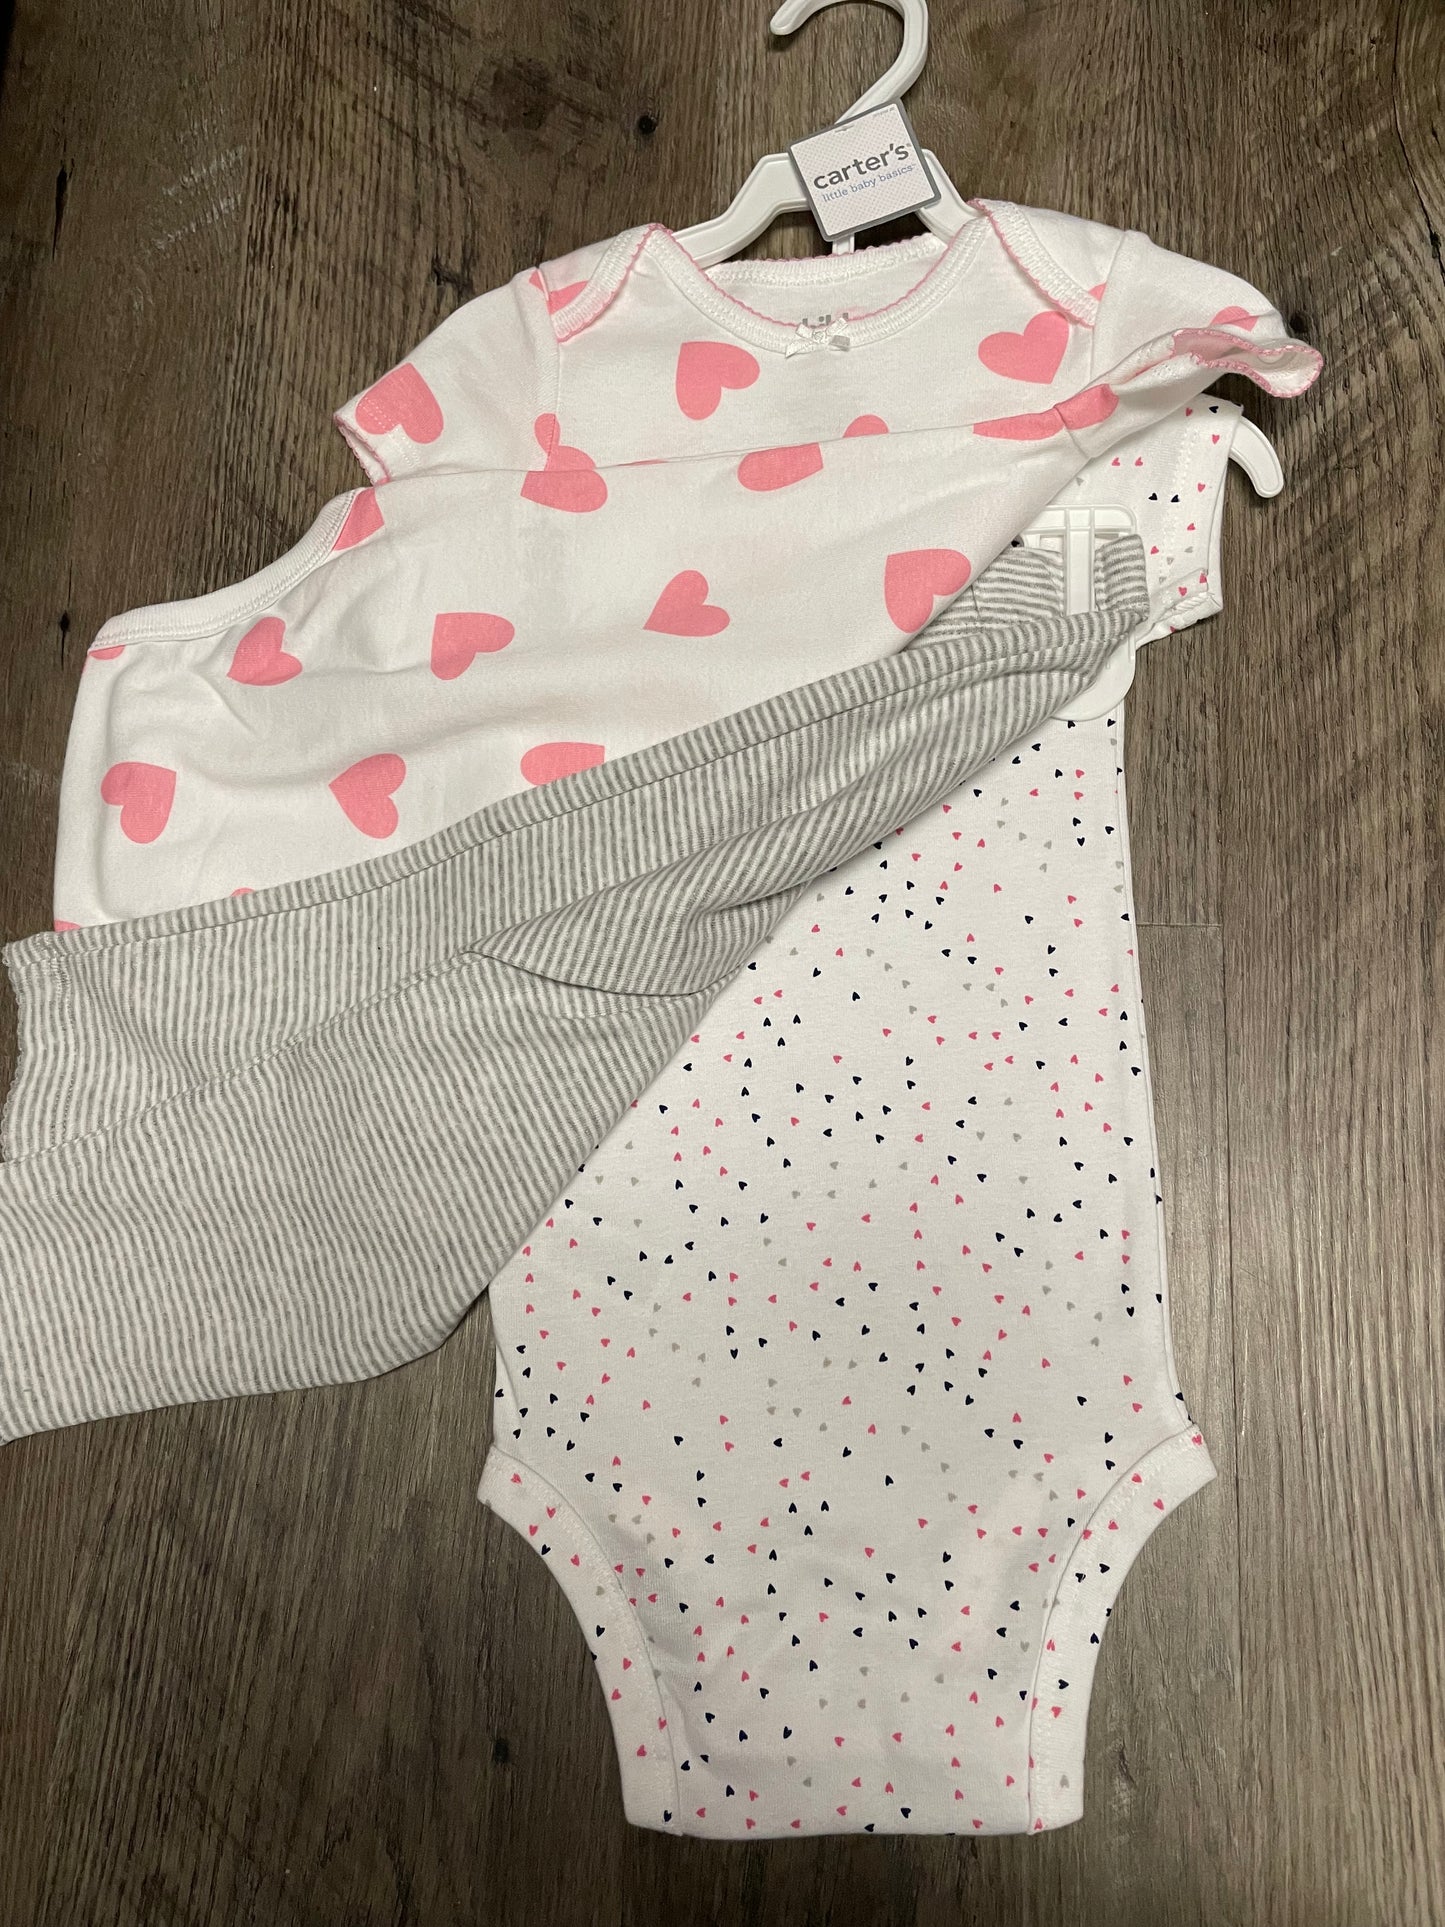 New Baby girl 18 months carters three piece set